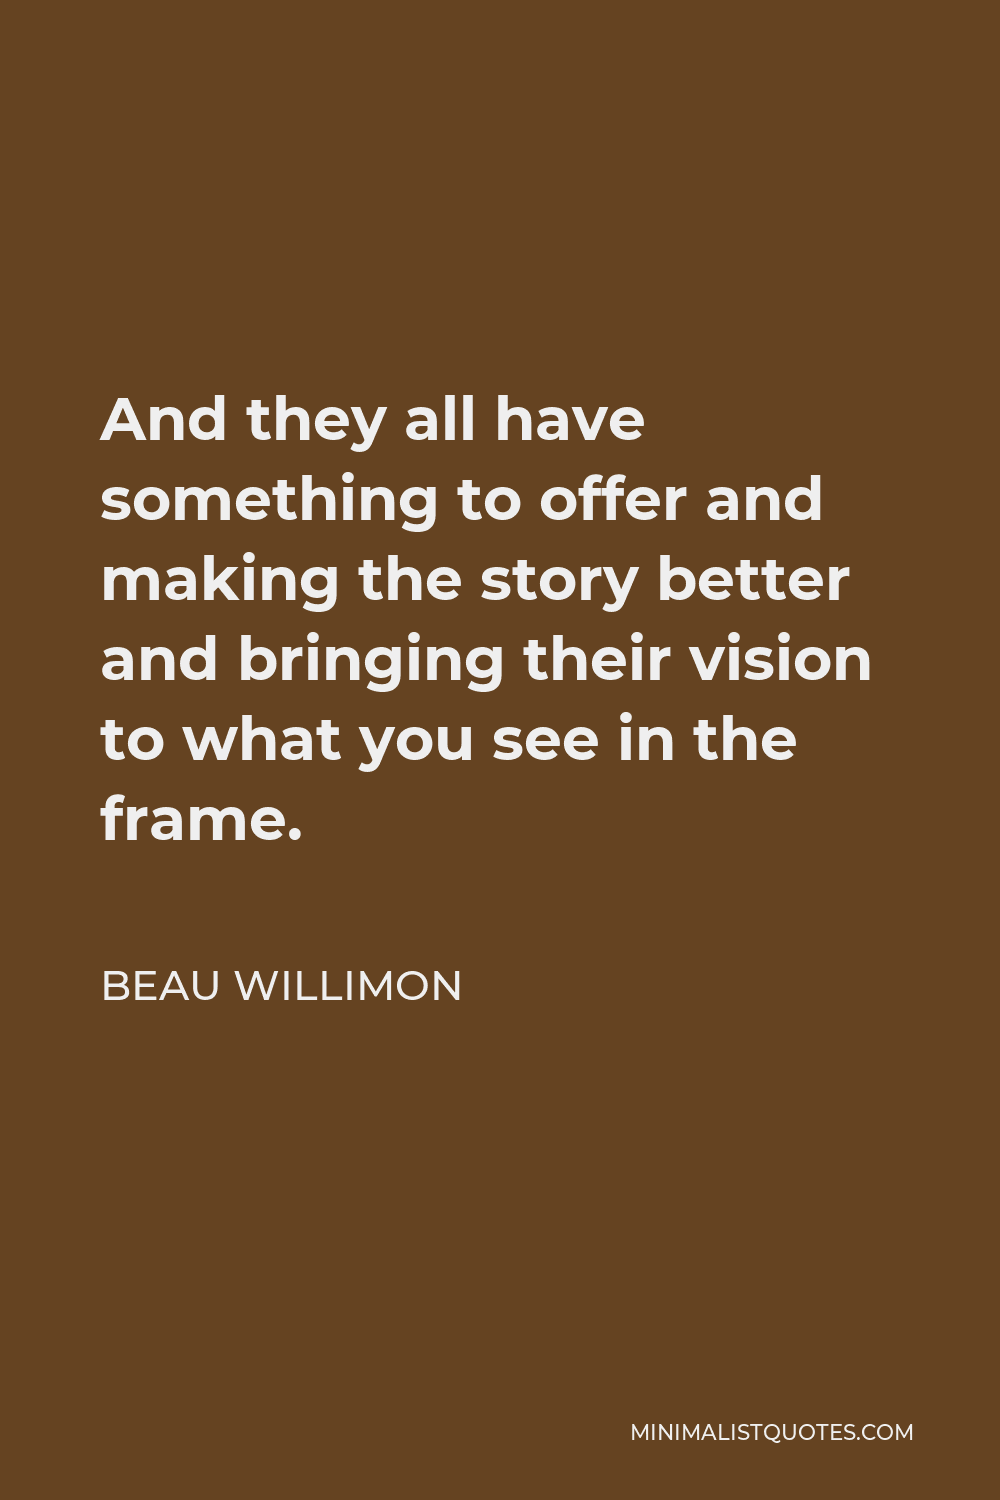 Beau Willimon Quote - And they all have something to offer and making the story better and bringing their vision to what you see in the frame.